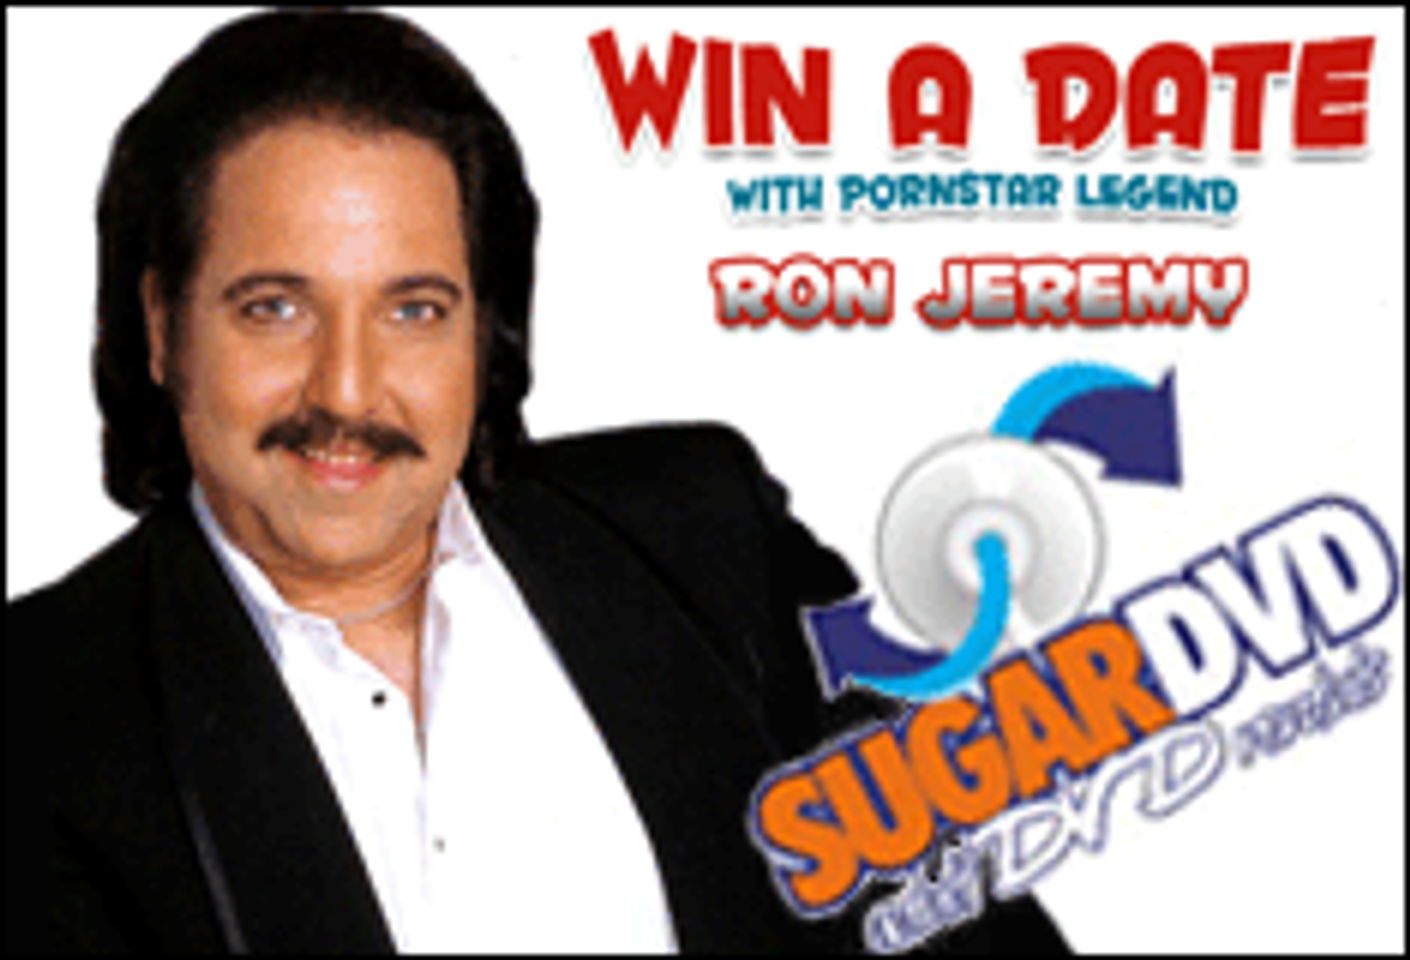 SugarDVD Offers Date with Ron Jeremy